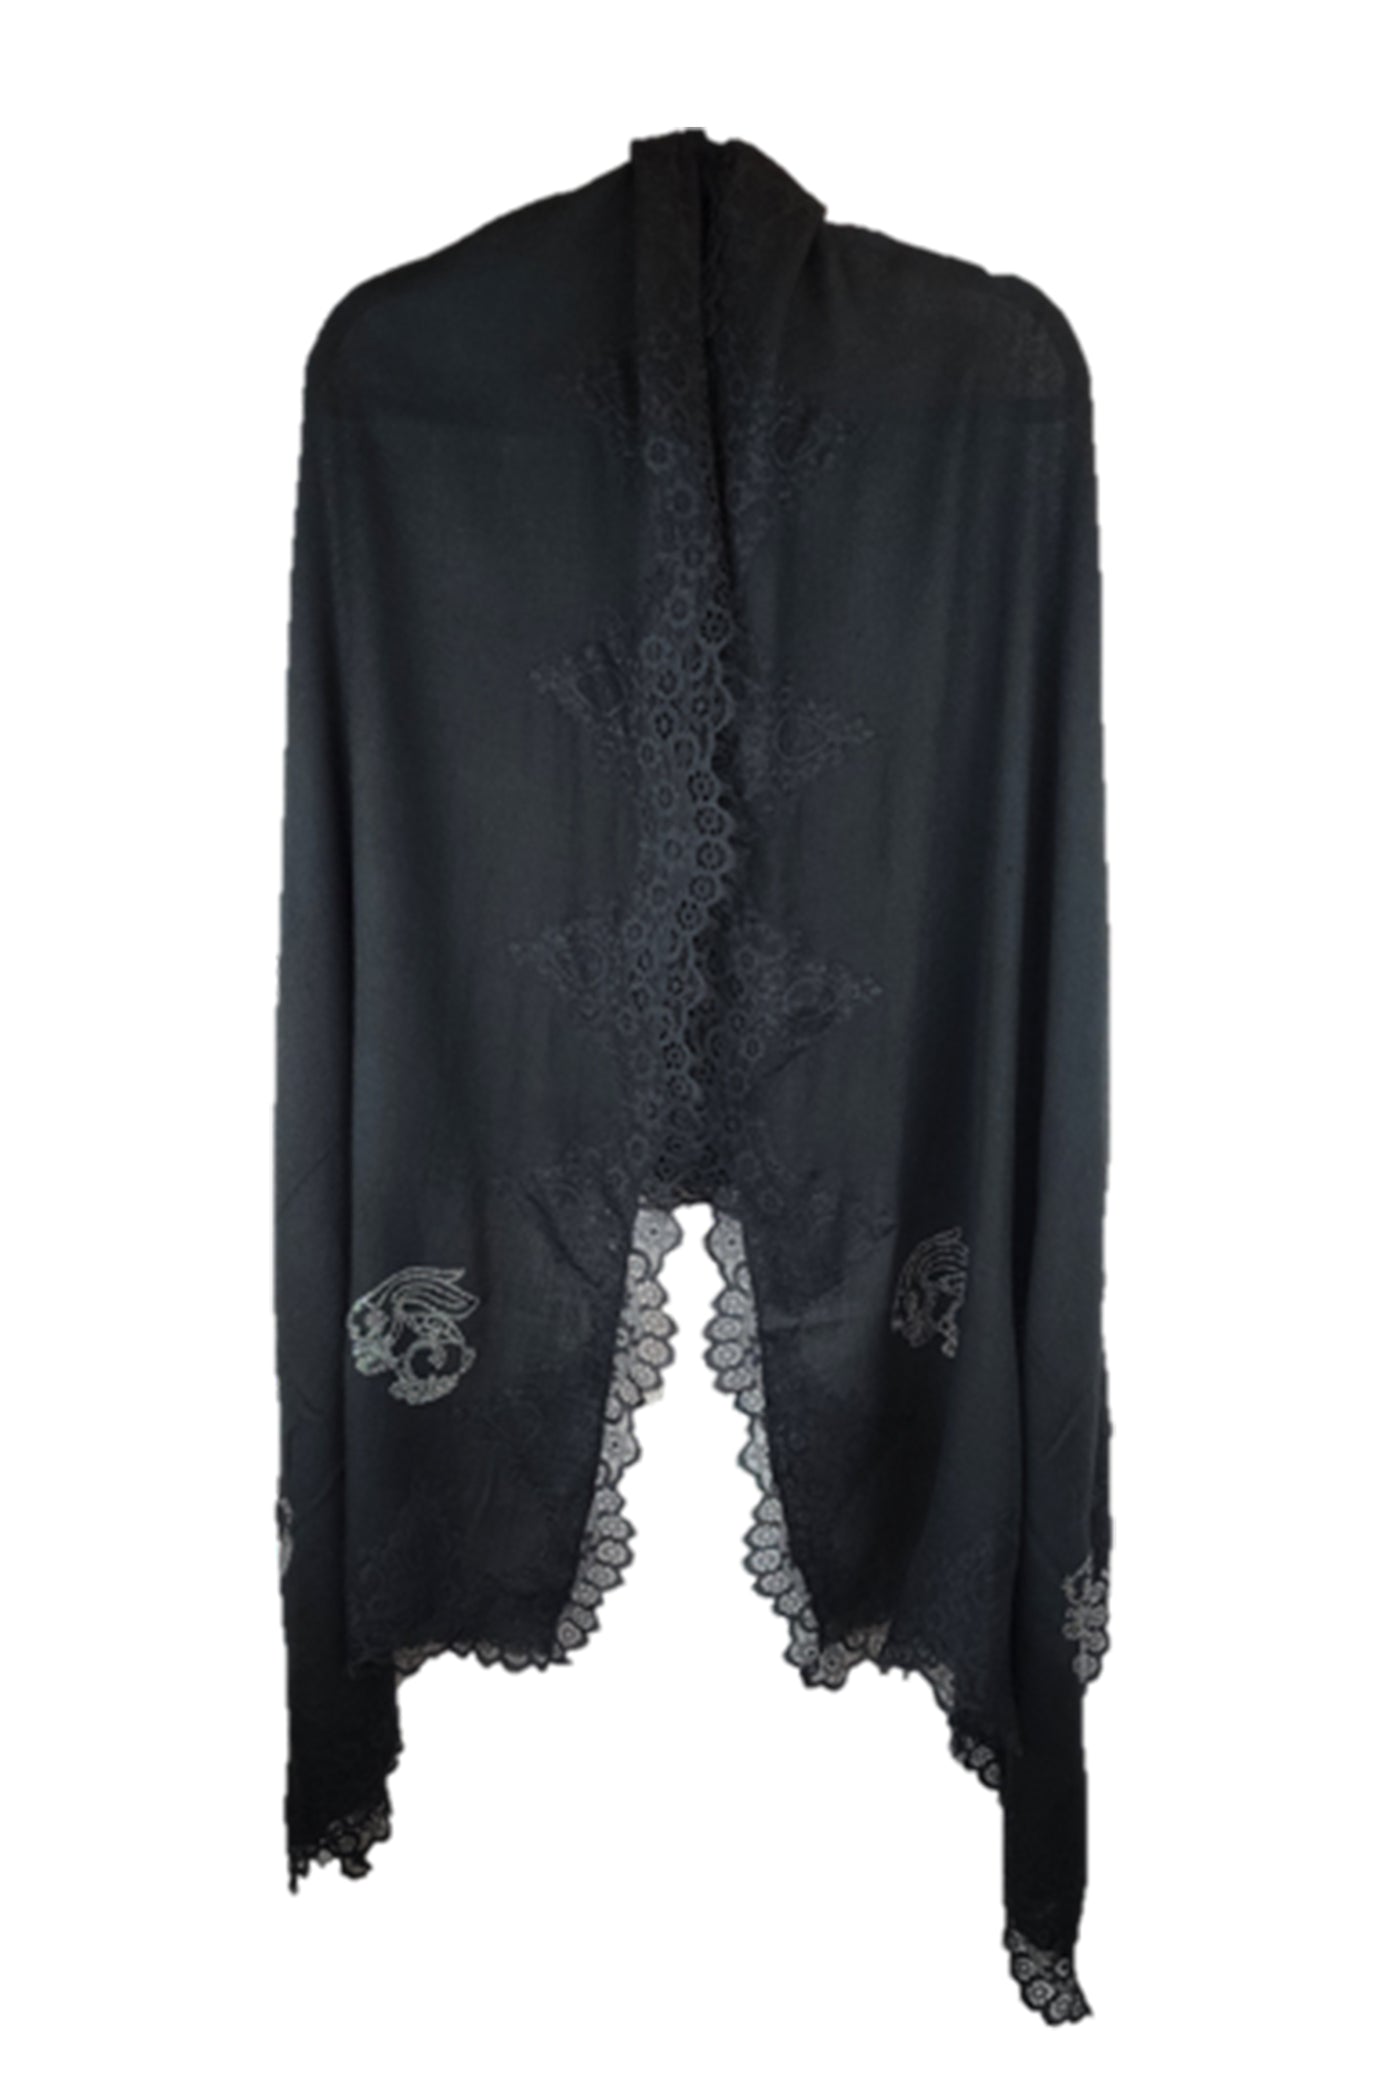 Queenmark Black Lace With Rabbit accessories online shopping melange singapore